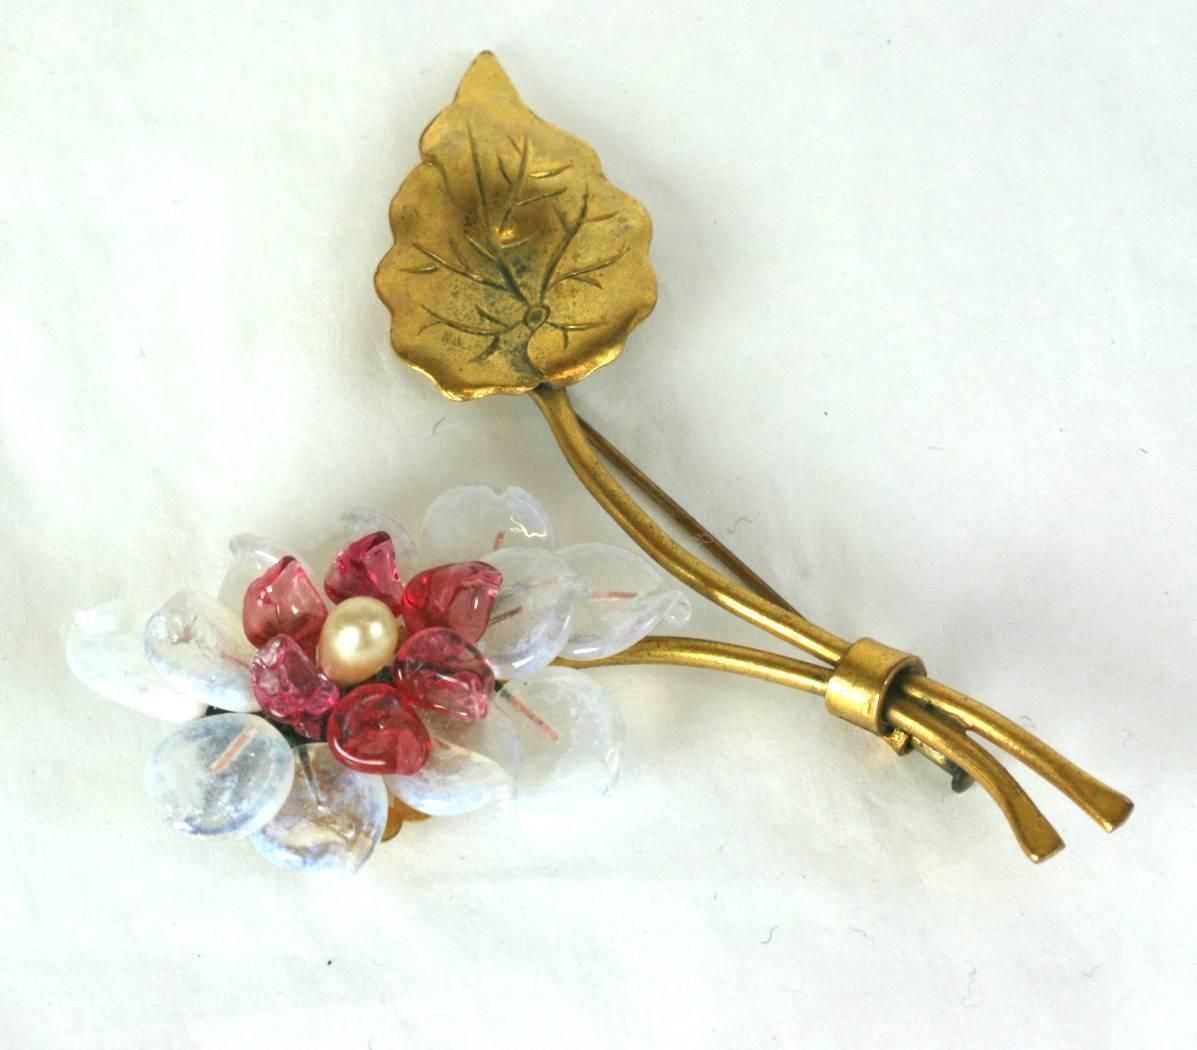 Louis Rousselet pate de verre and faux pearl signature flower brooch of gilt metal stem and opaline and faux ruby leaves. 1930's France. Excellent Condition.
Length 3.25